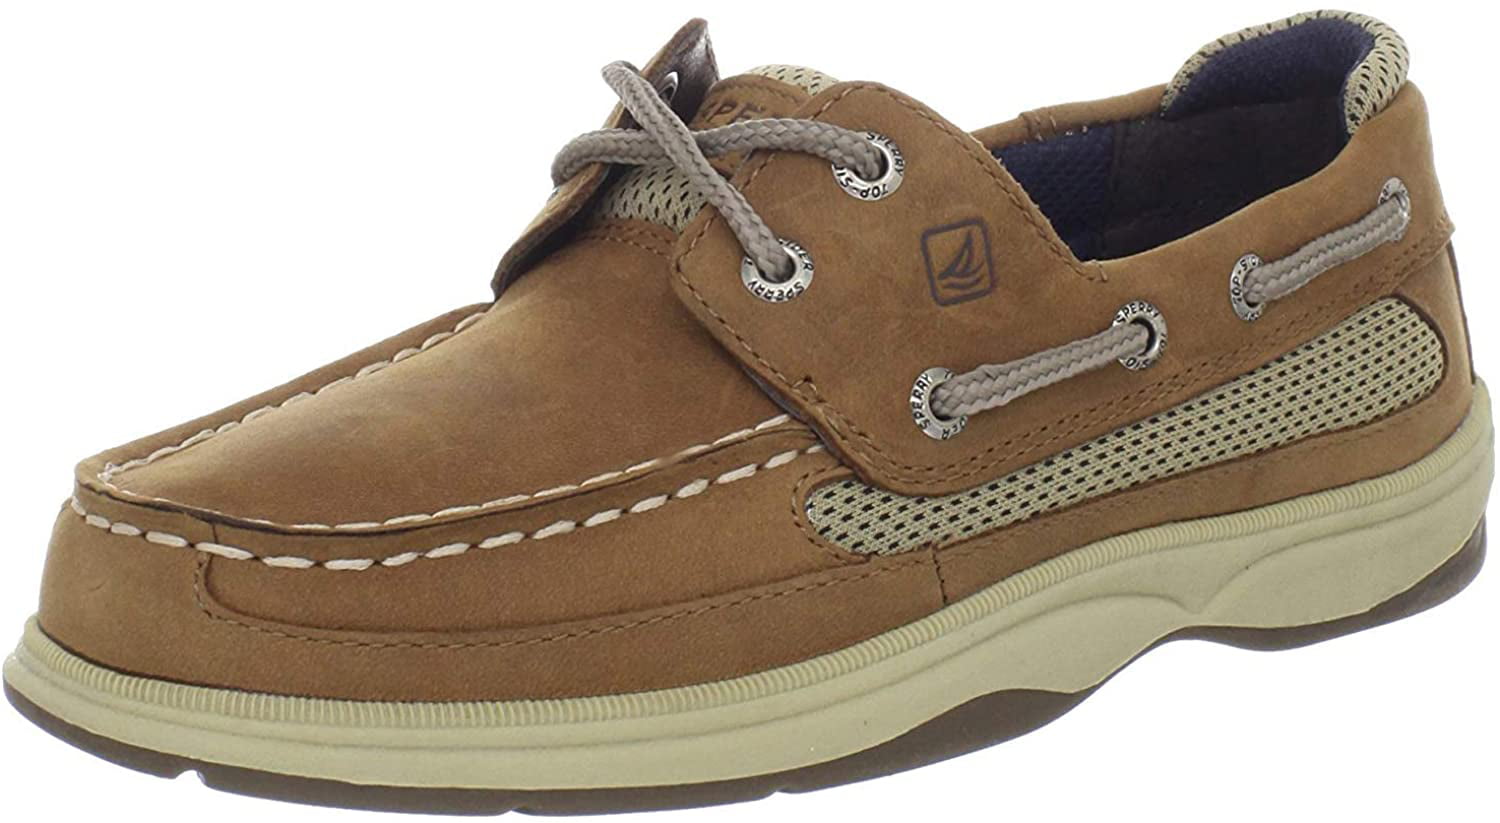 Sperry Boys Kids Lanyard Boat Shoes Brown 2 M